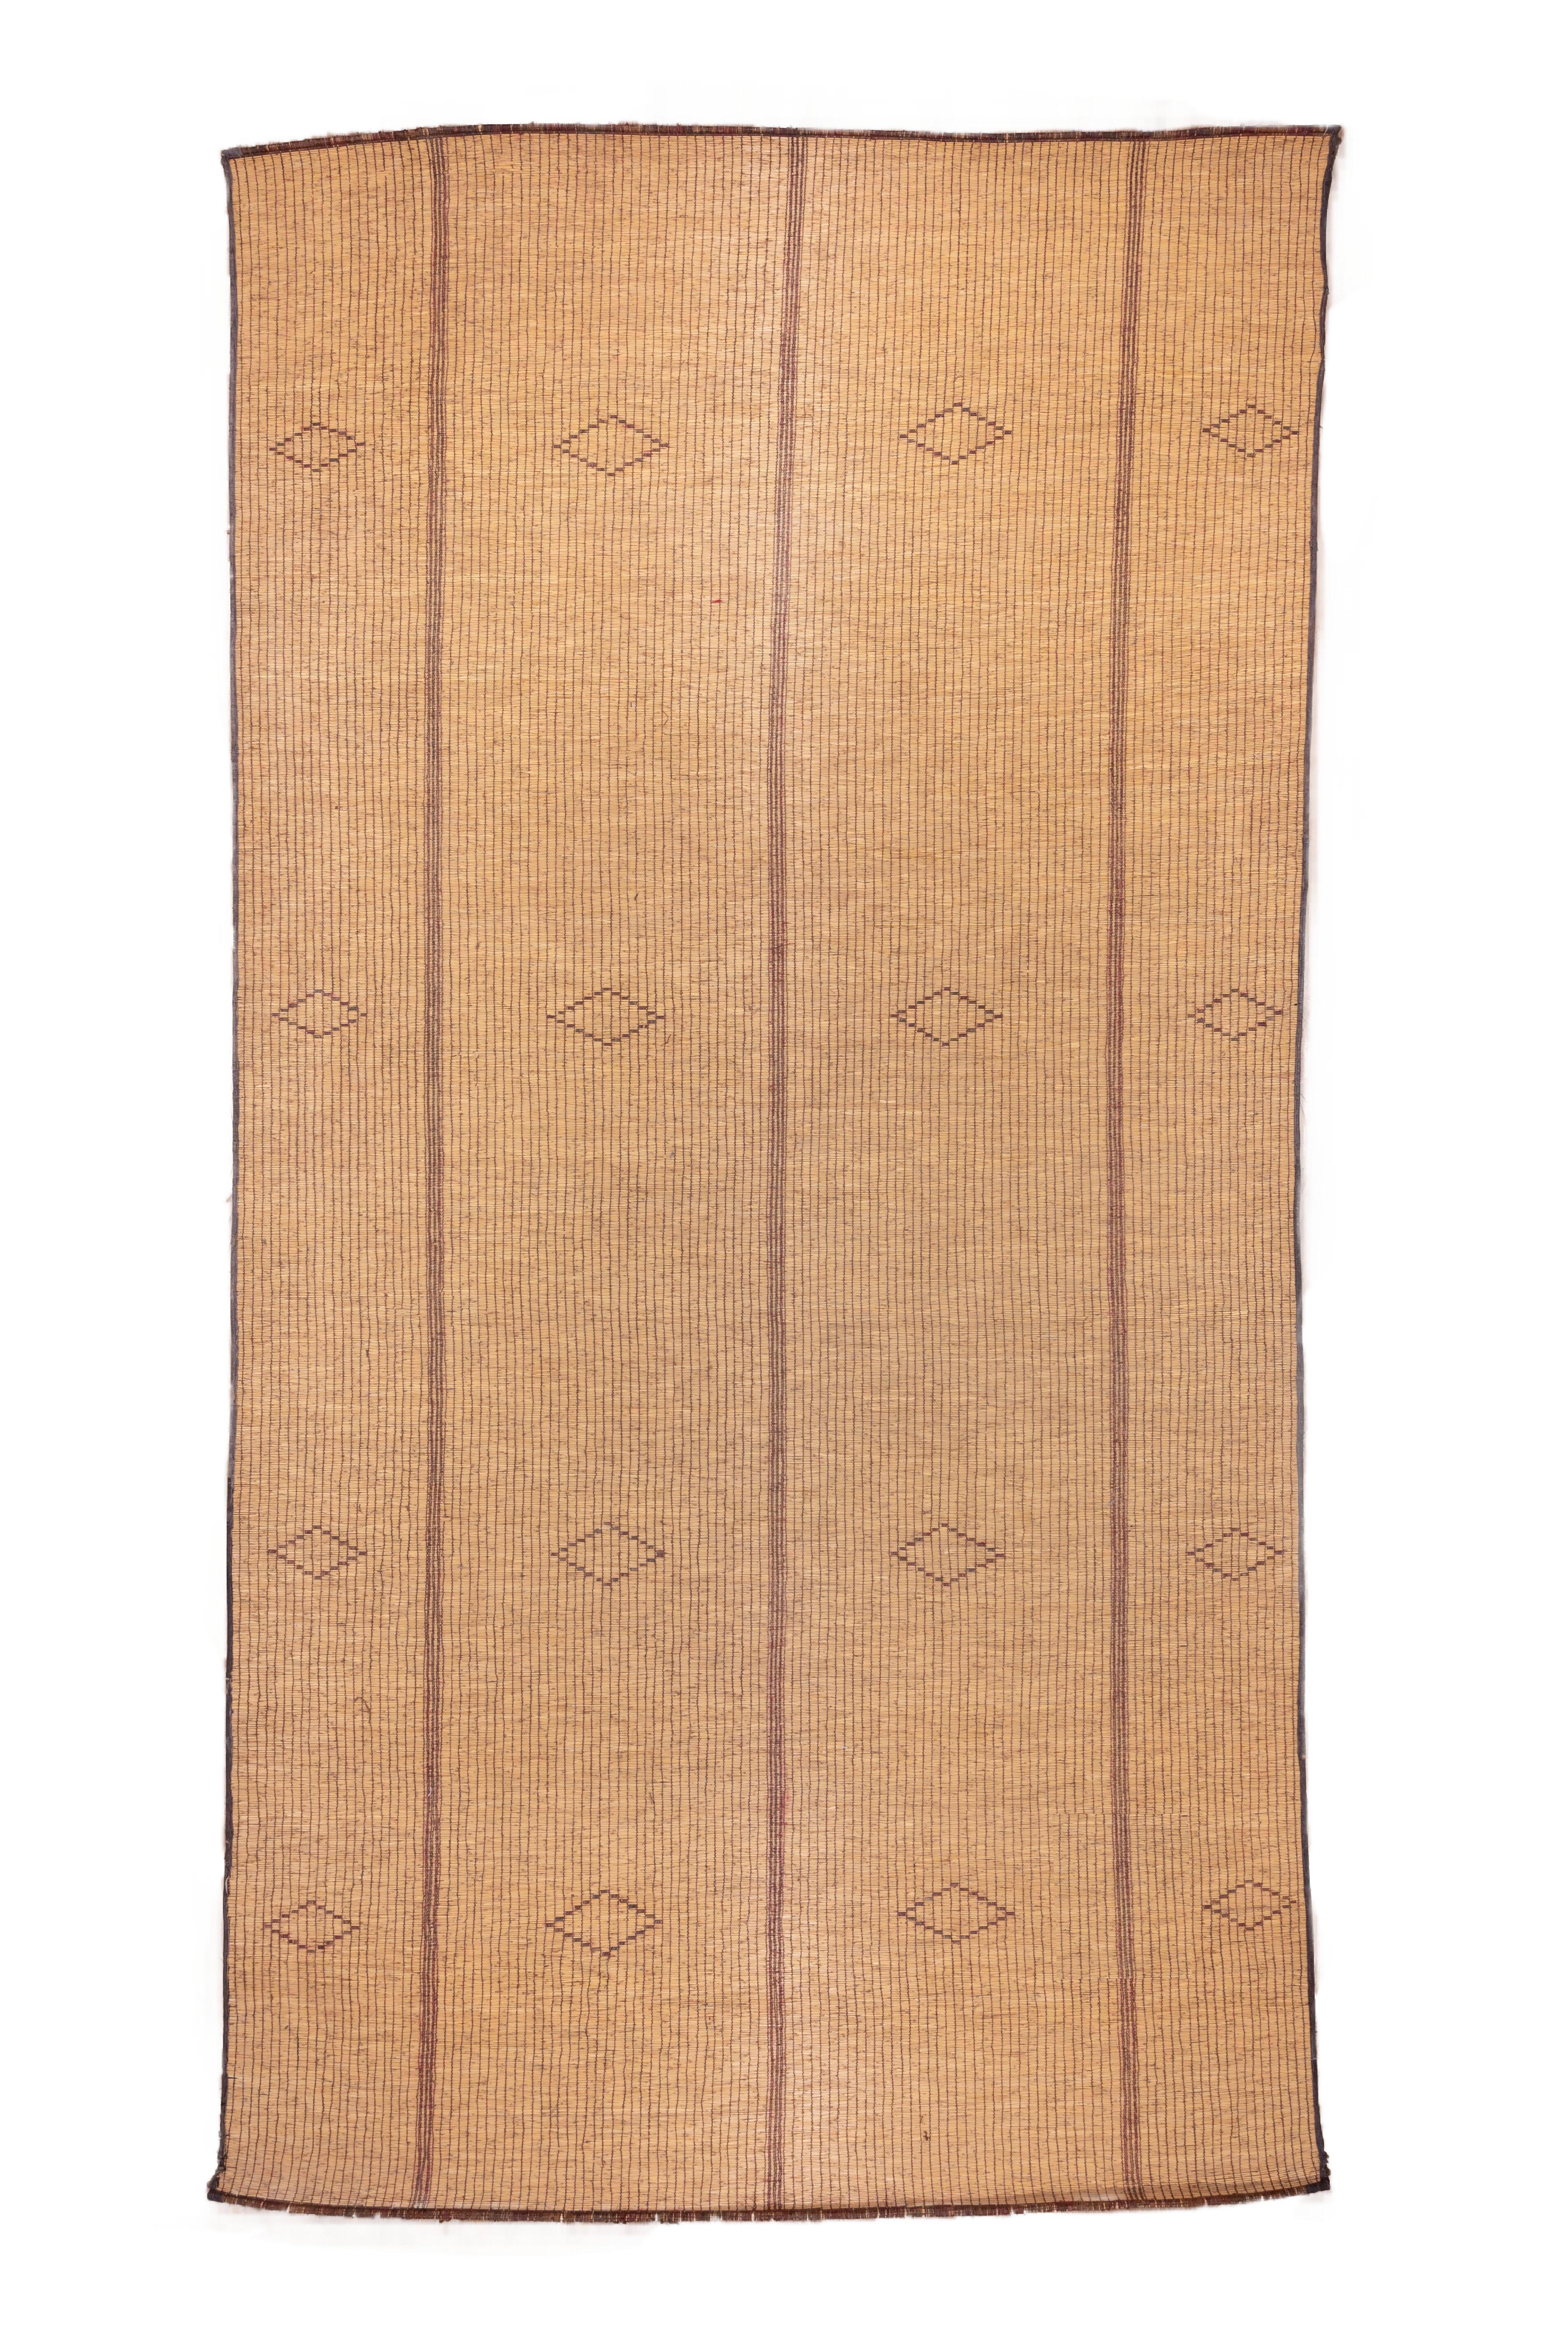 The oatmeal beige field is vertically divided into four wider and slightly narrower panels, uniformly decorated with subtle, floating small open lozenges. Sienna brown is manifested in the encompassing thin border. Good condition.

Tuareg Reed